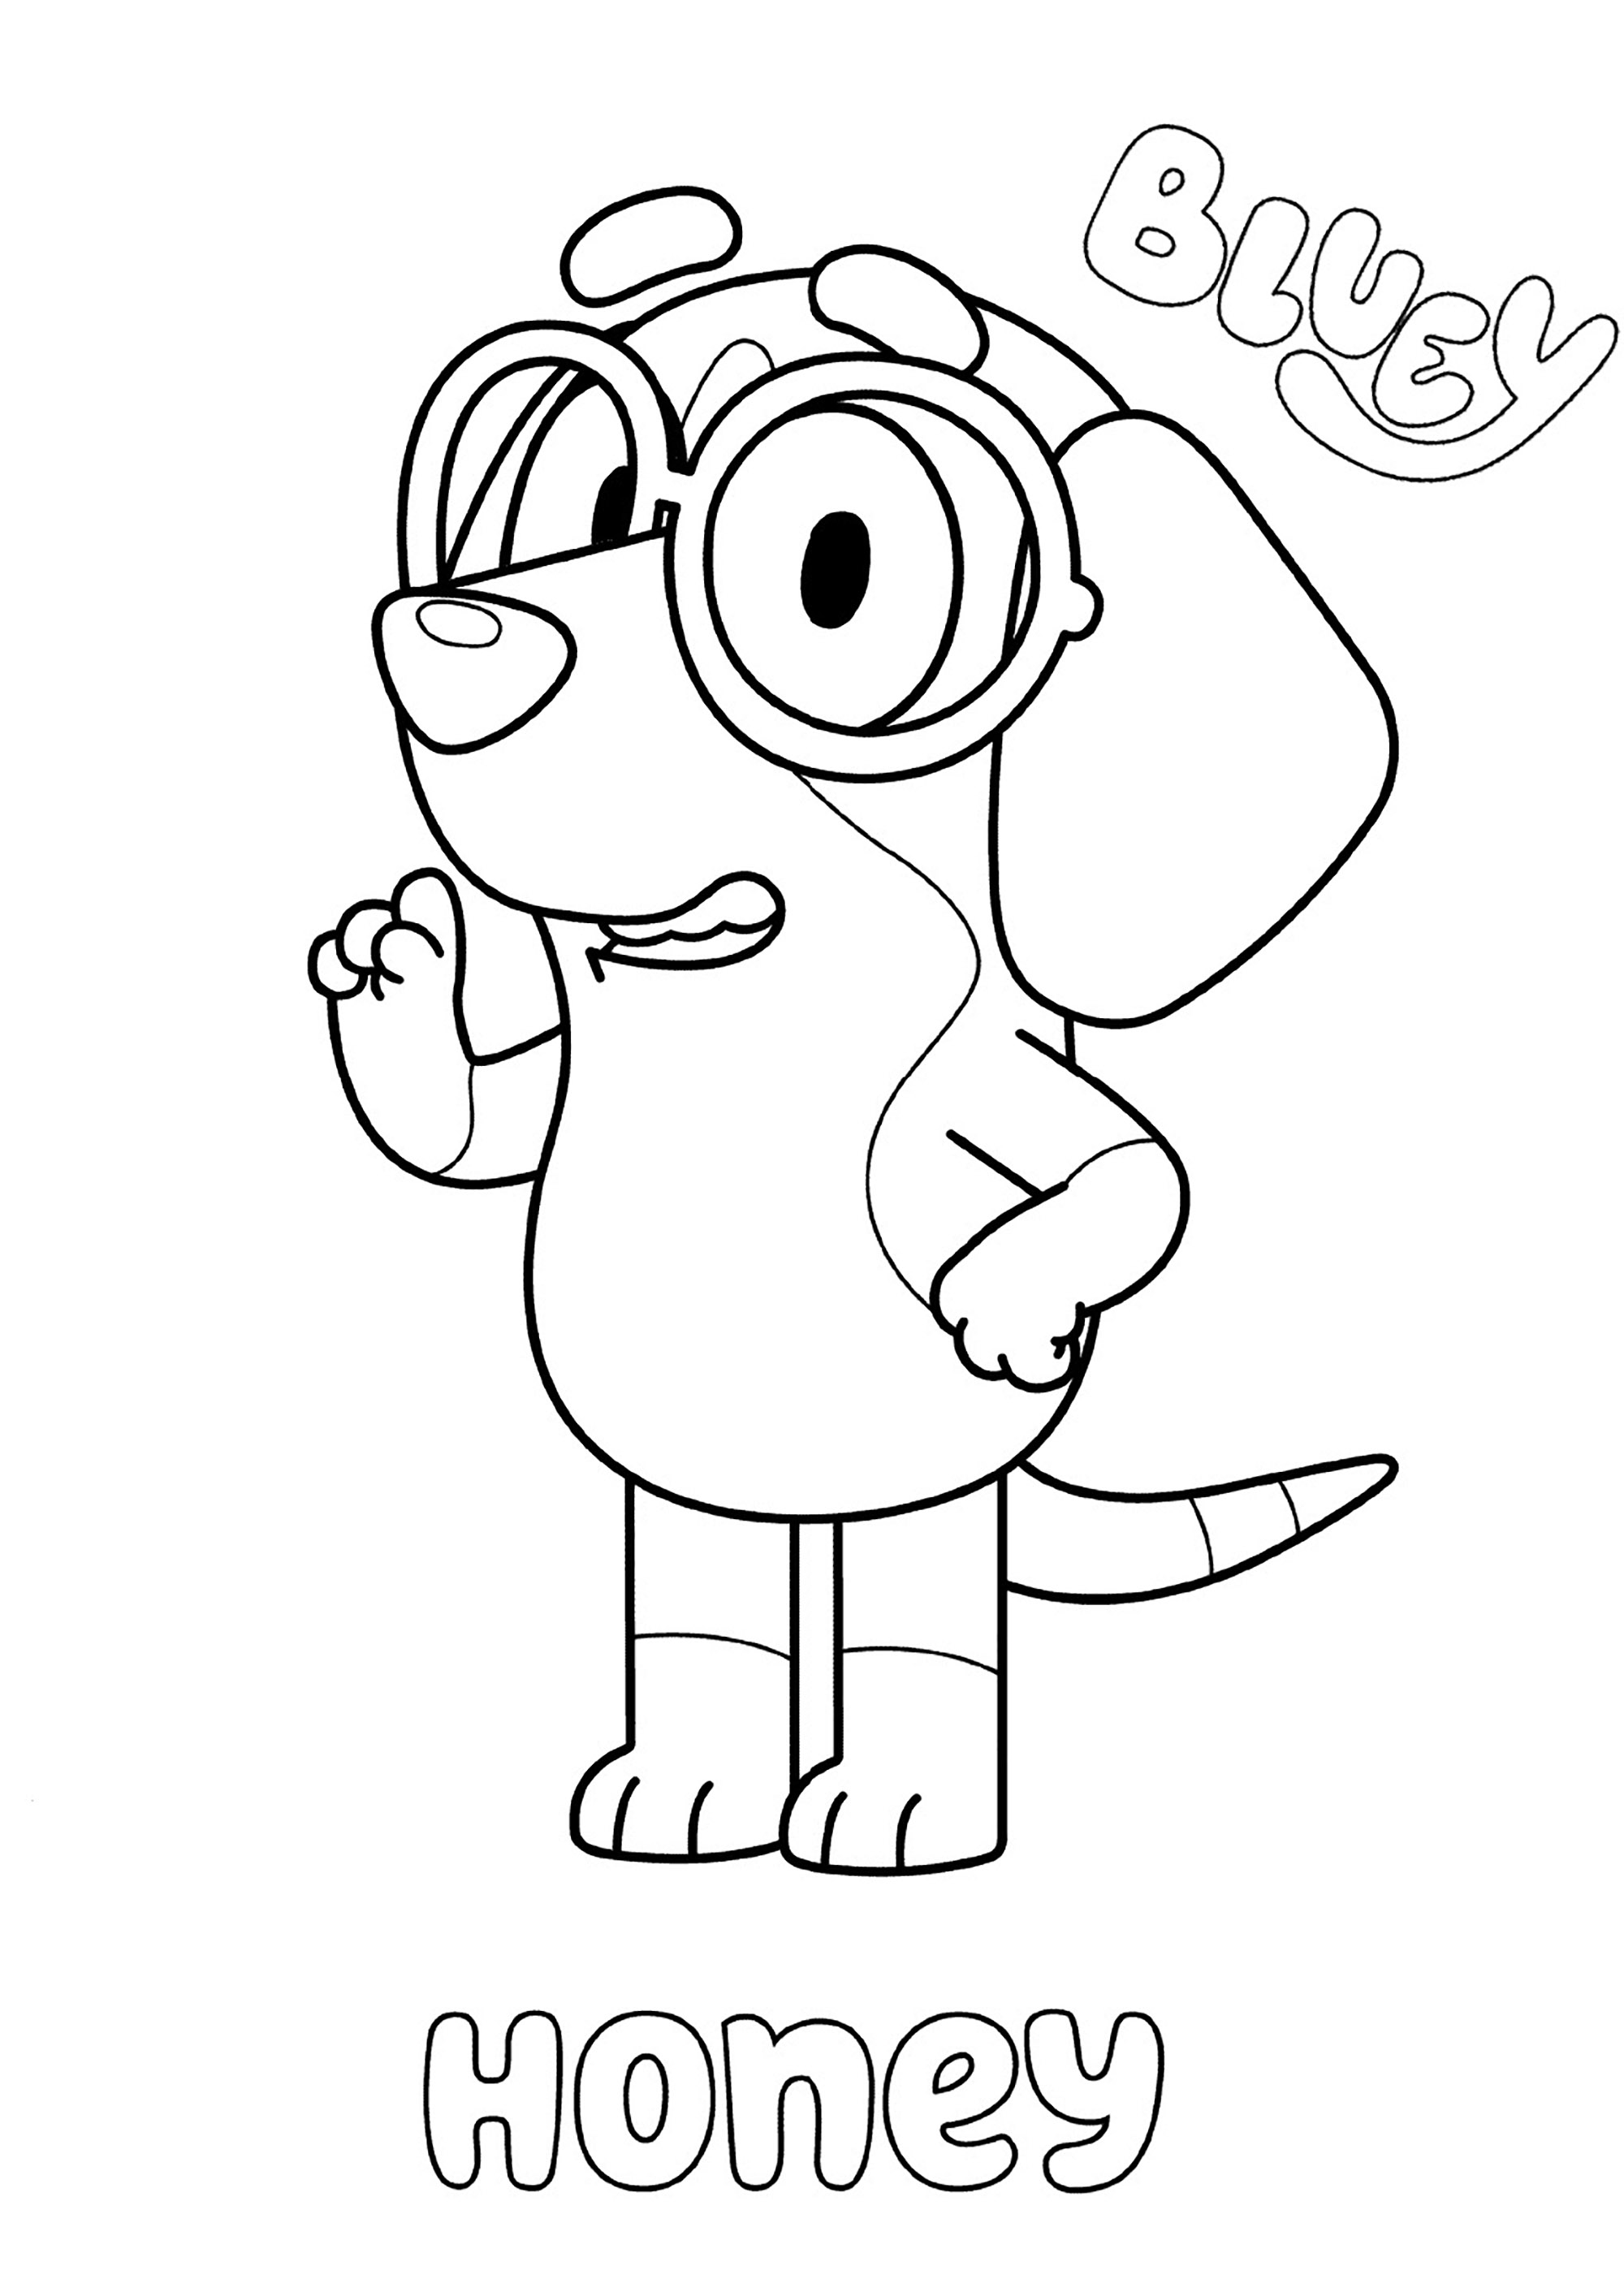 Coloring page with Bluey: Honey